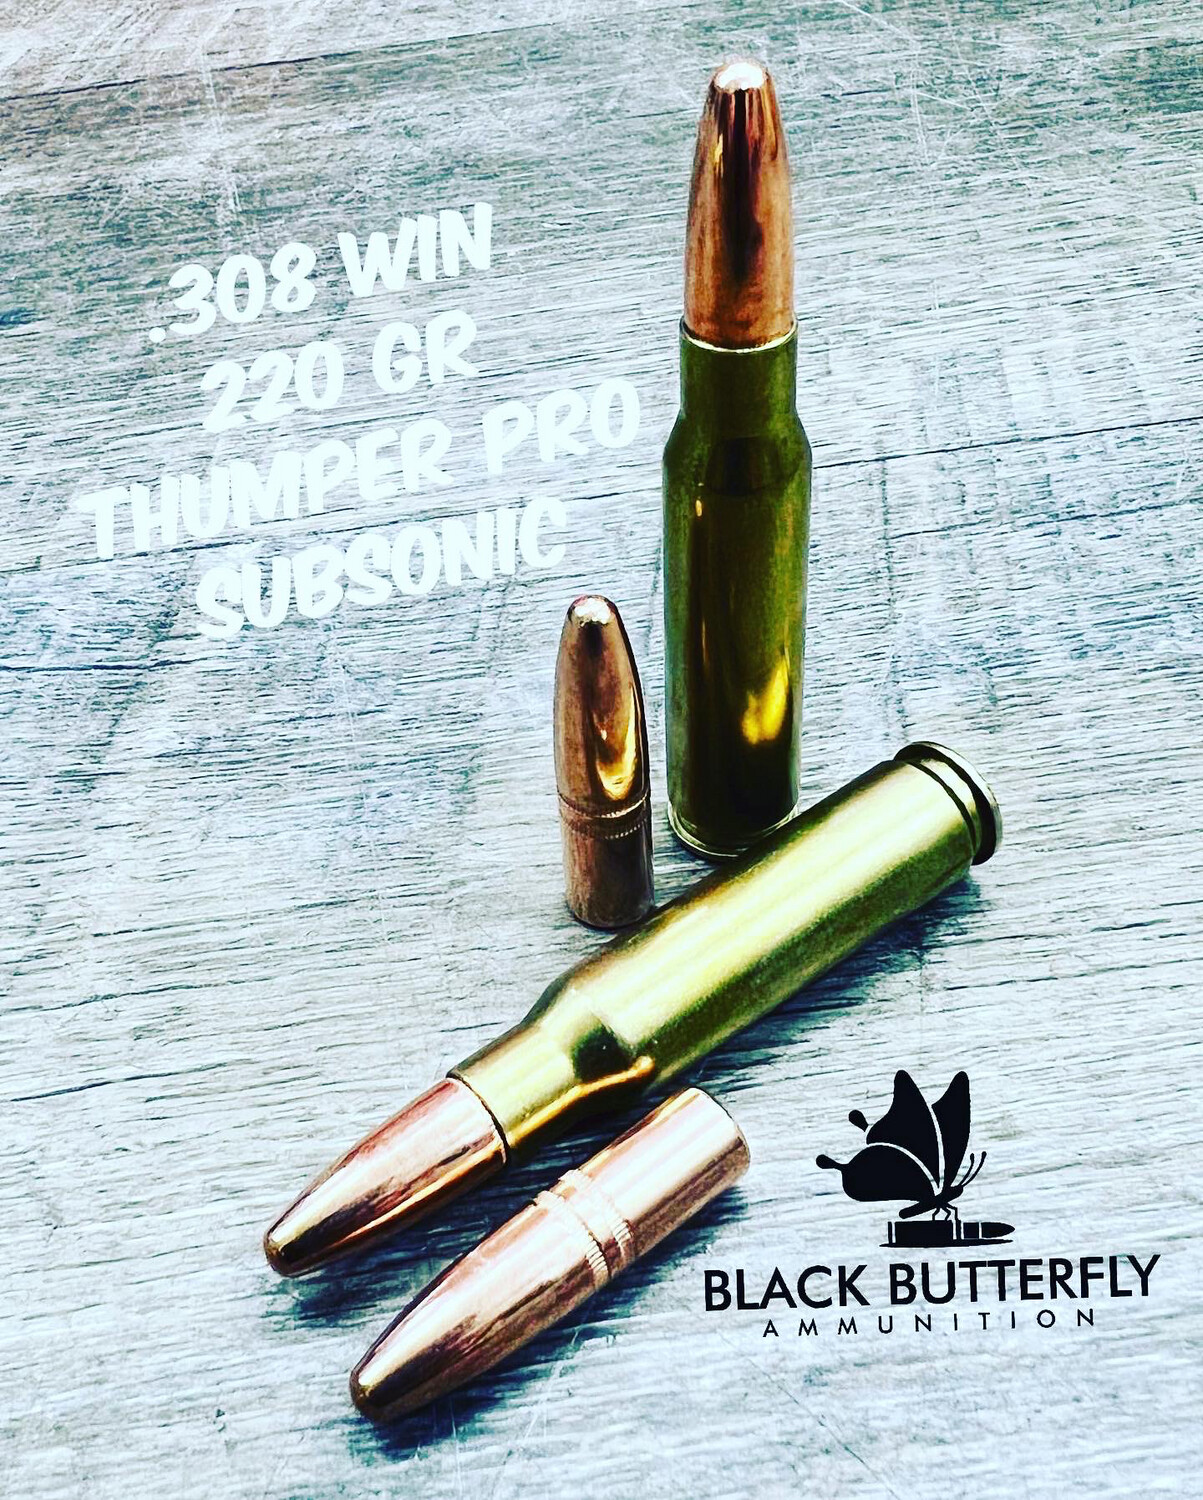 Black Butterfly Ammunition, .308 WIN/7.62x51mm, 220 gr., 20 Rounds, "THUMPER PRO" SUBSONIC for 1:10 Twist 20" Rifles